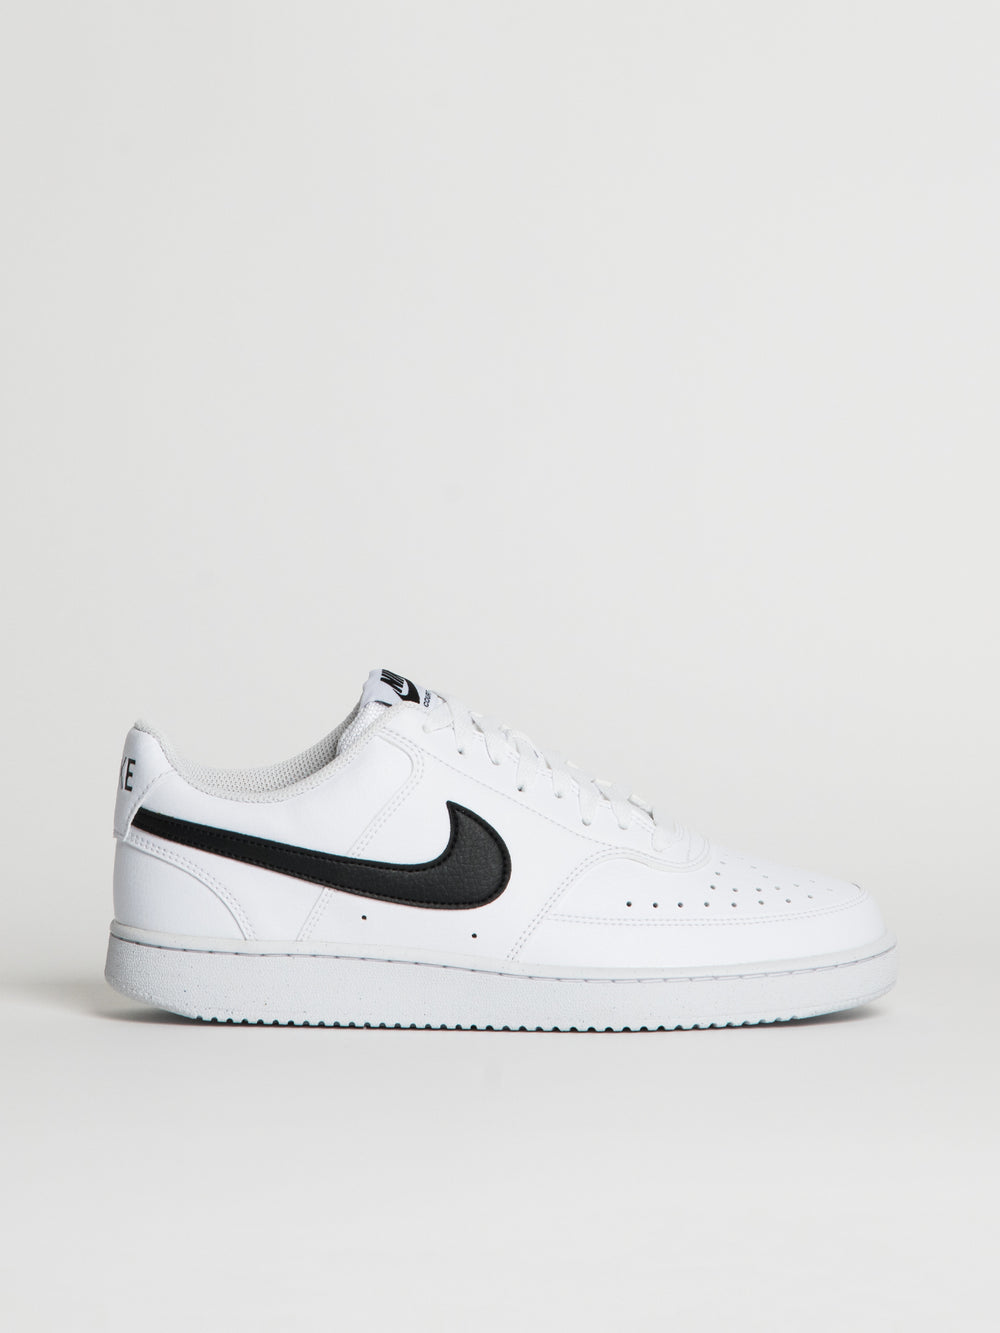 MENS NIKE COURT VISION LOW NEXT NATURE